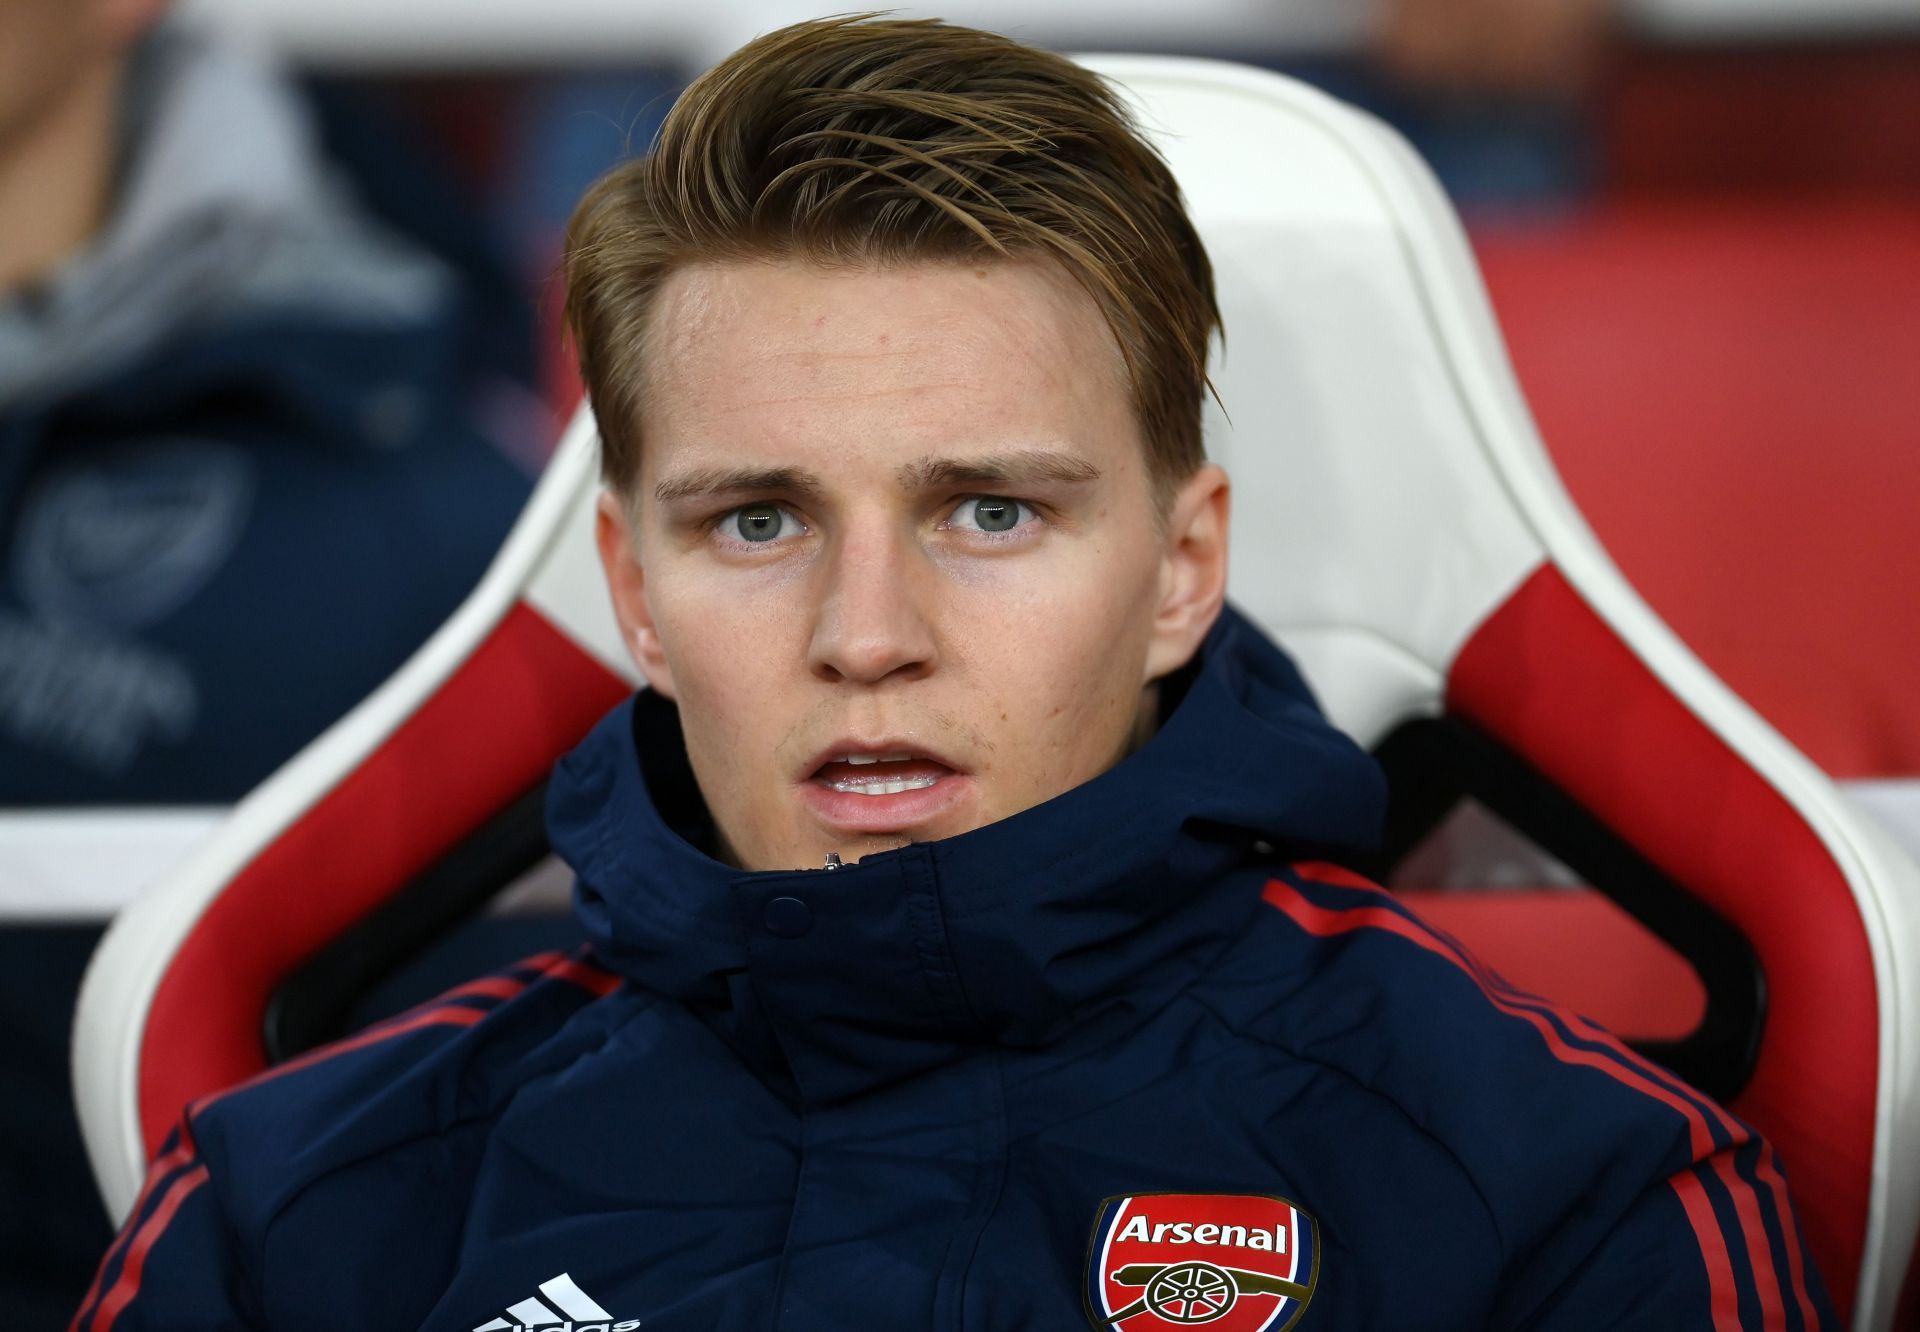 Martin Odegaard has gone from strength to strength this season at the Emirates.